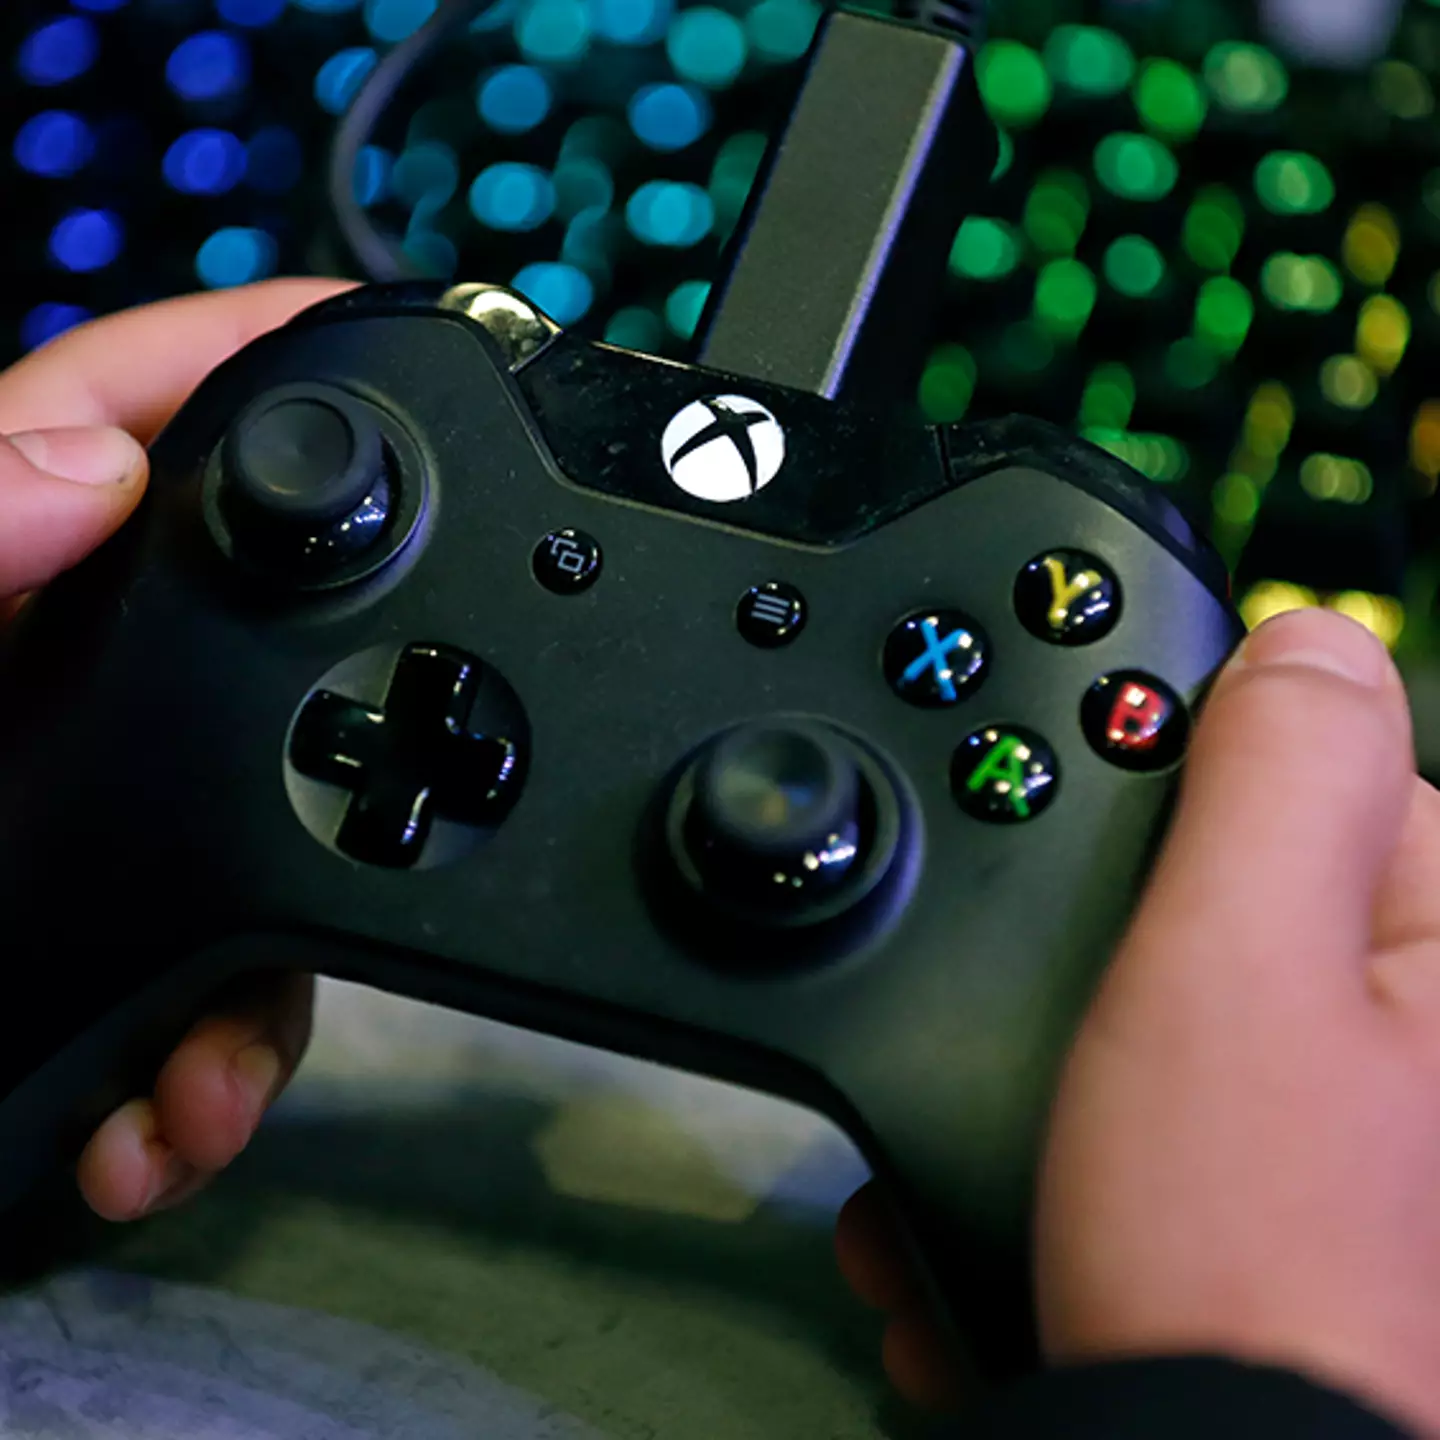 Xbox users can now increase download speeds with one very easy step